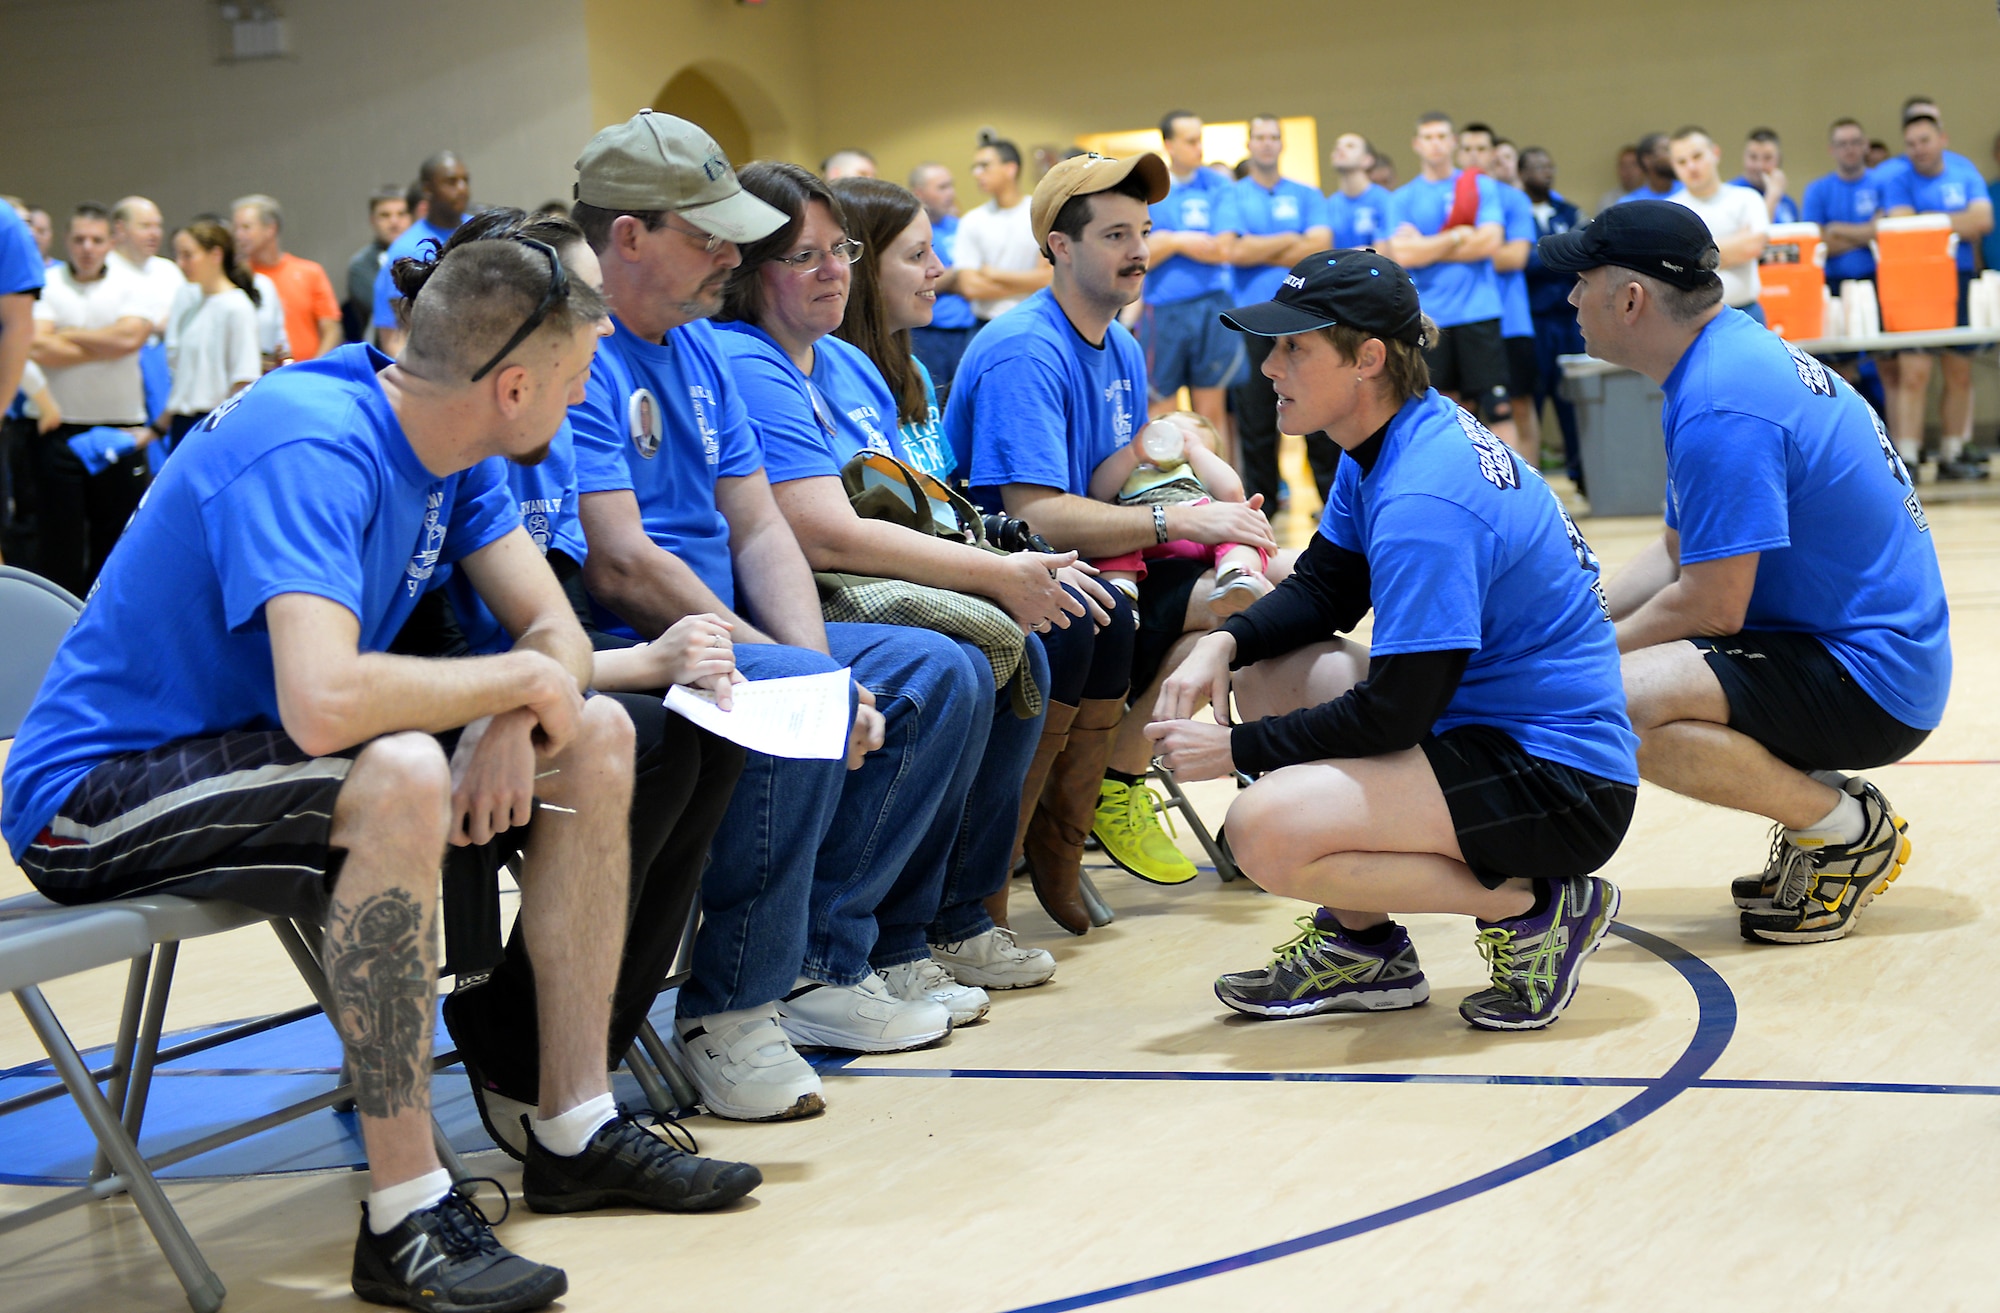 Col. Kristin Goodwin, 2nd Bomb Wing commander, and Chief Master Sgt. Tommy Mazzone, 2nd Bomb Wing command chief, speak with the late Senior Airman Bryan Bell’s family on Barksdale Air Force Base, La., Dec. 5, 2014. More than 320 people gathered to pay tribute to the fallen hero at the fitness center named in his honor. (U.S. Air Force photo/Airman 1st Class Curt Beach)